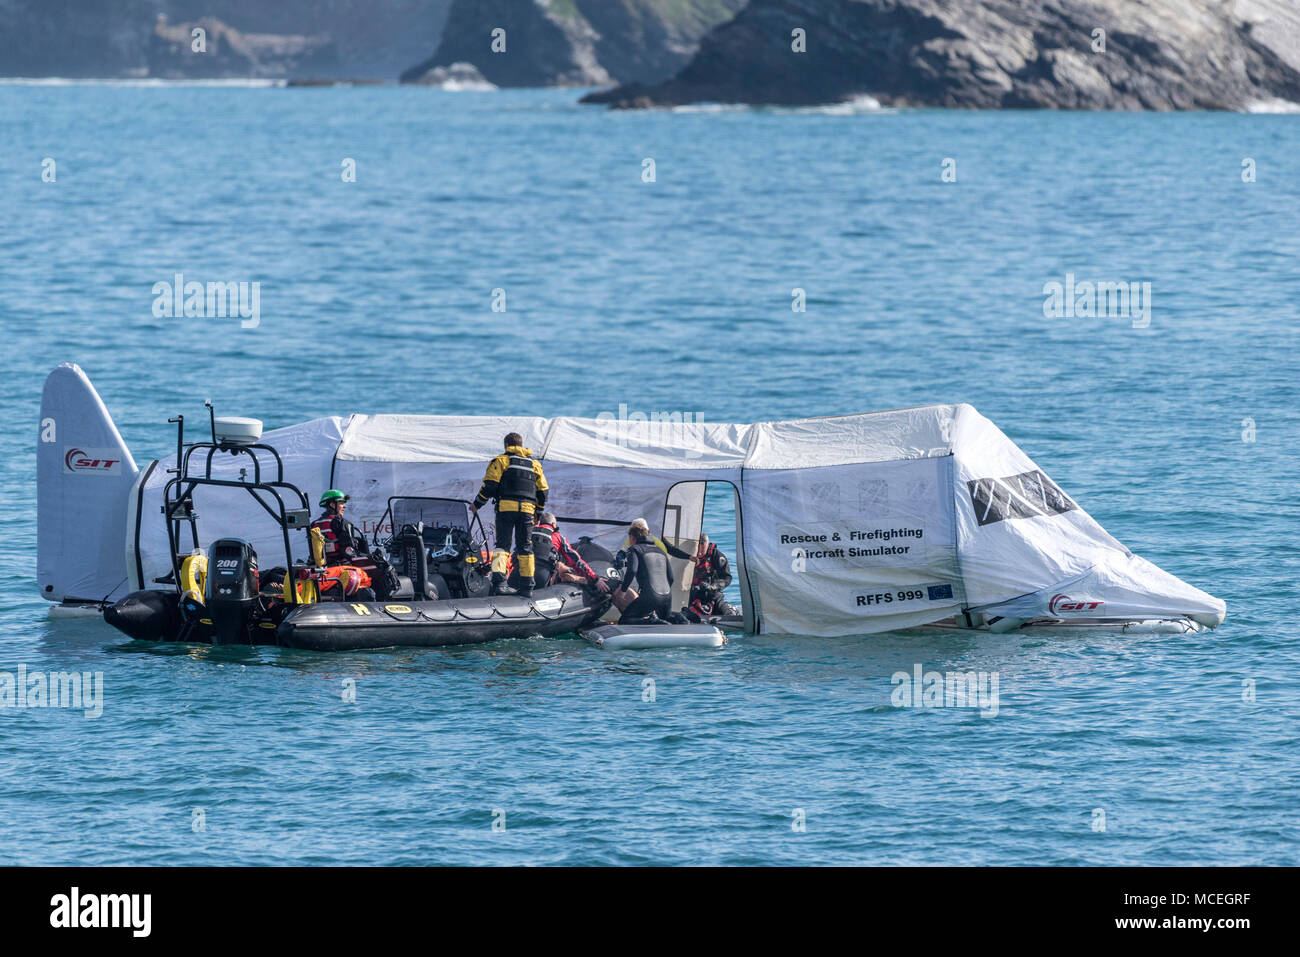 A Rescue and Firefighting Aircraft Simulator used in a GMICE (Good Medicine in Challenging Environments) major incident exercise in Newquay Cornwall. Stock Photo